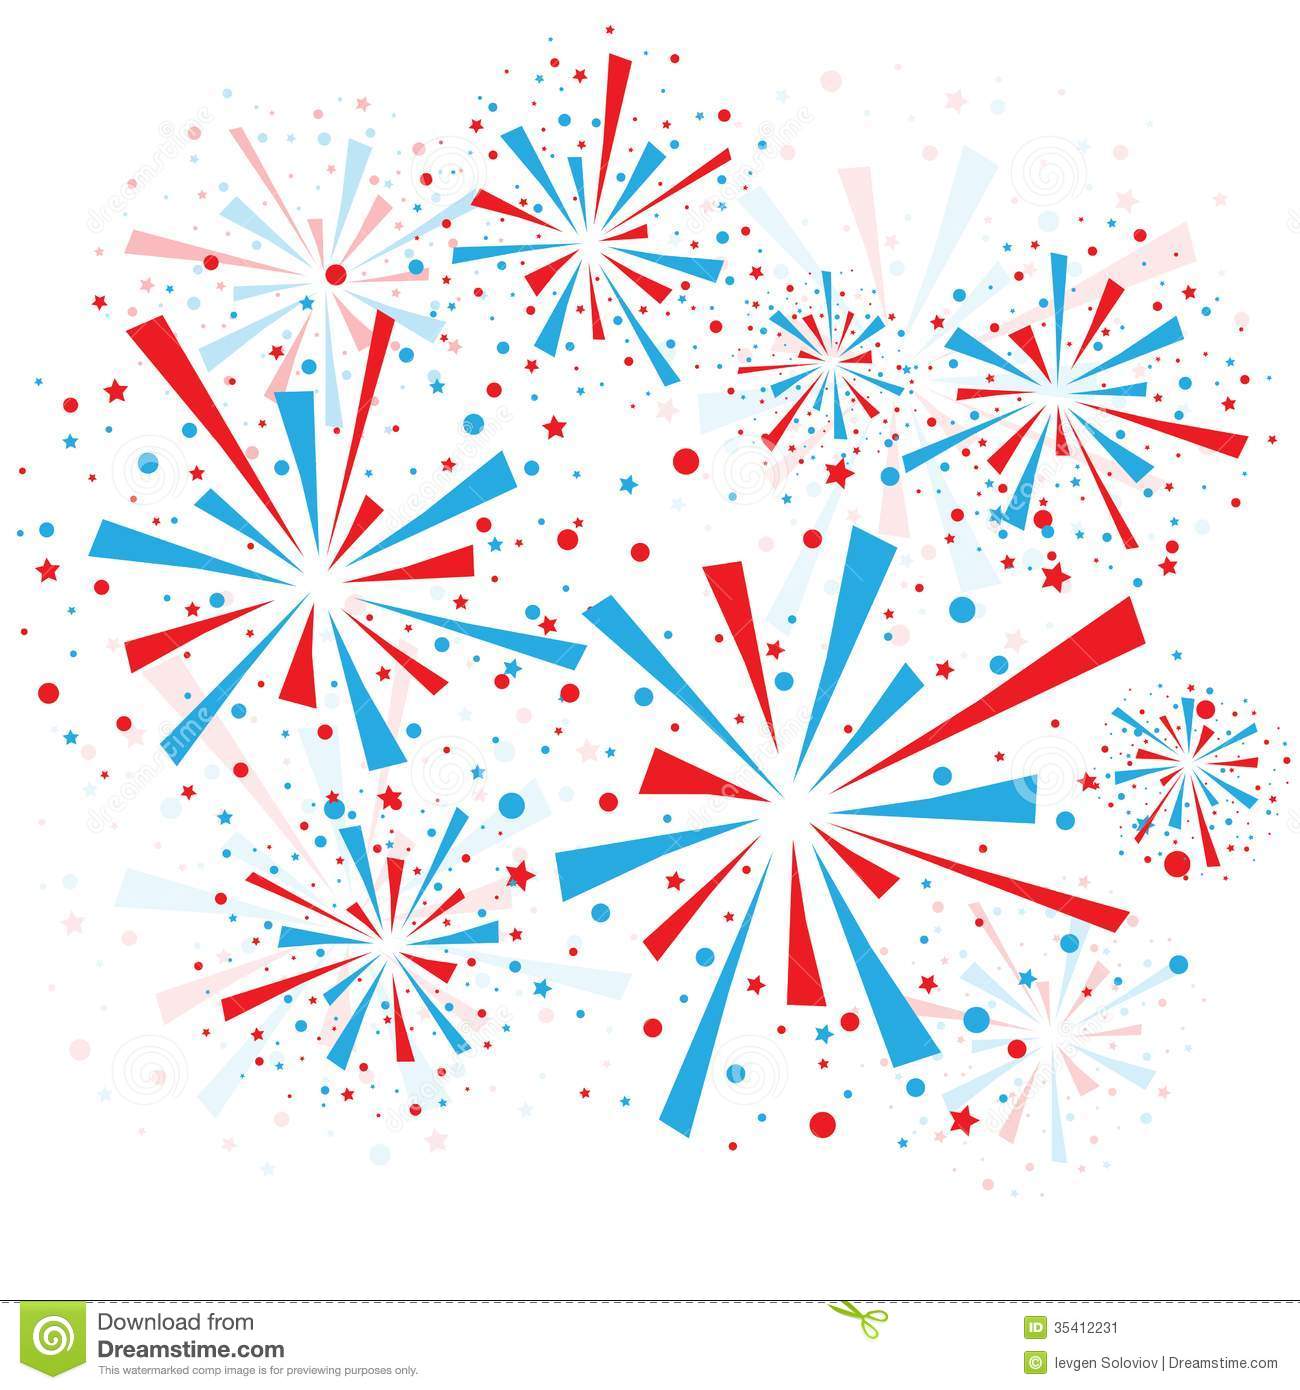 Red And Blue Fireworks On White Background Eps10 Mr No Pr No 3 1151 7